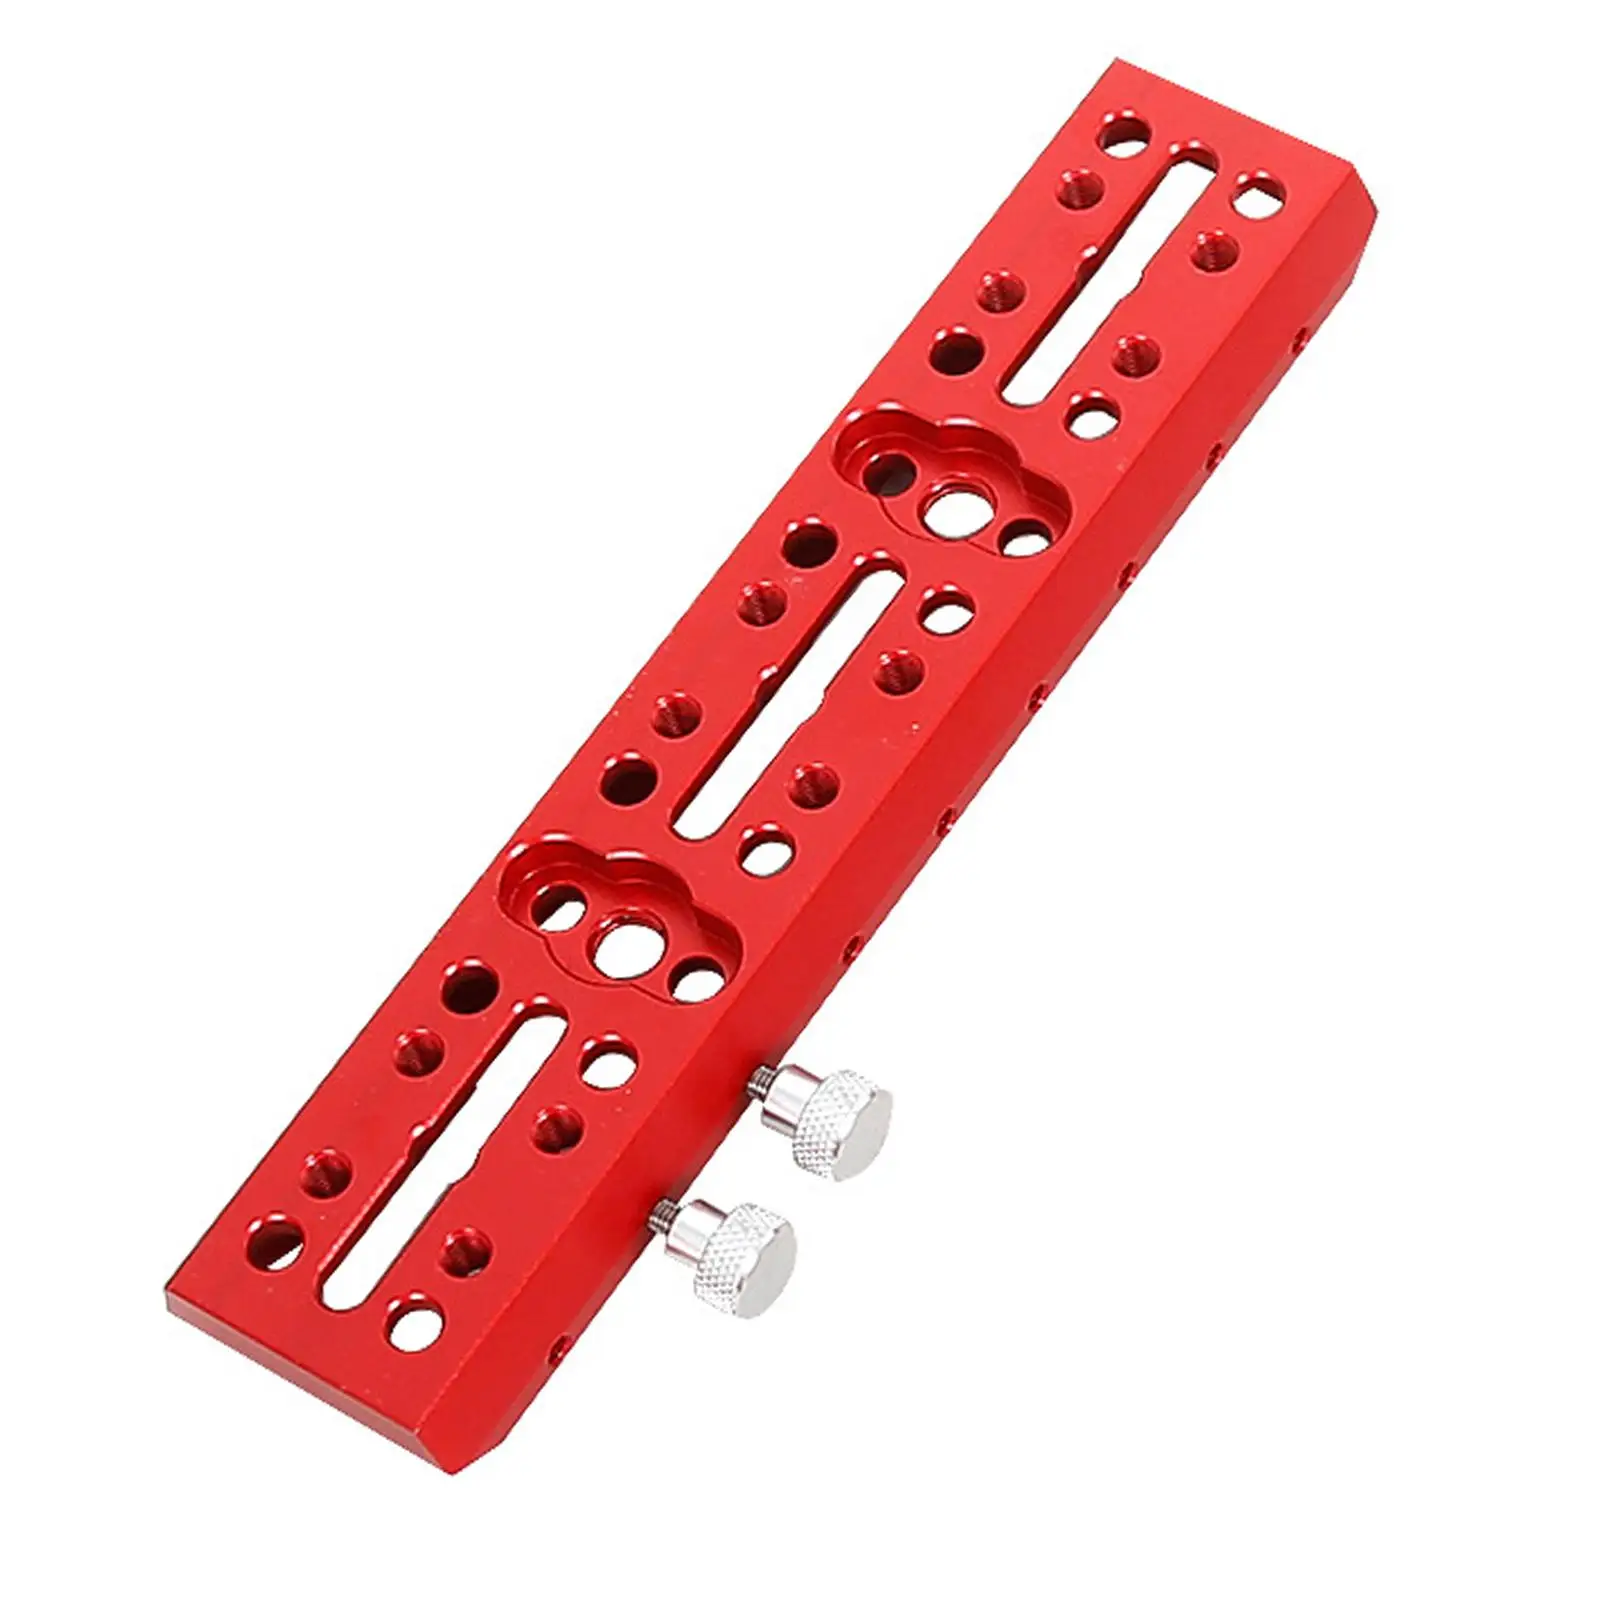 Telescope Dovetail Mounting Plate ,75 Degree Dovetail Plate with Screw, Rail Bar